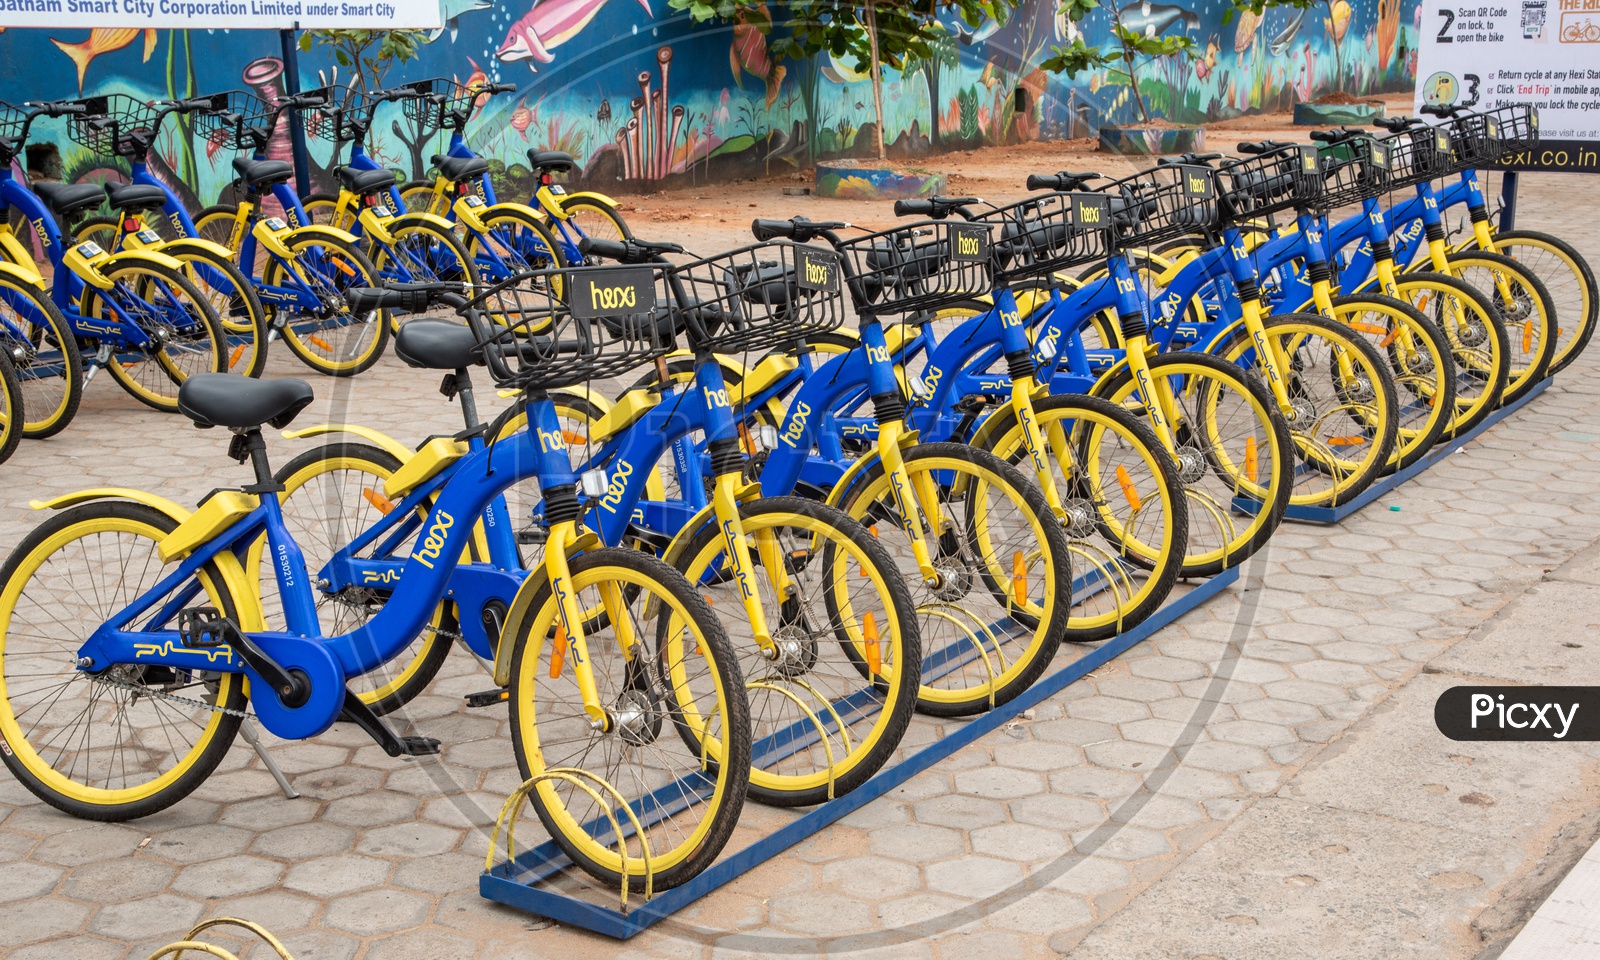 Share Bicycles of Hexa / Hero / Initiative of AP Government